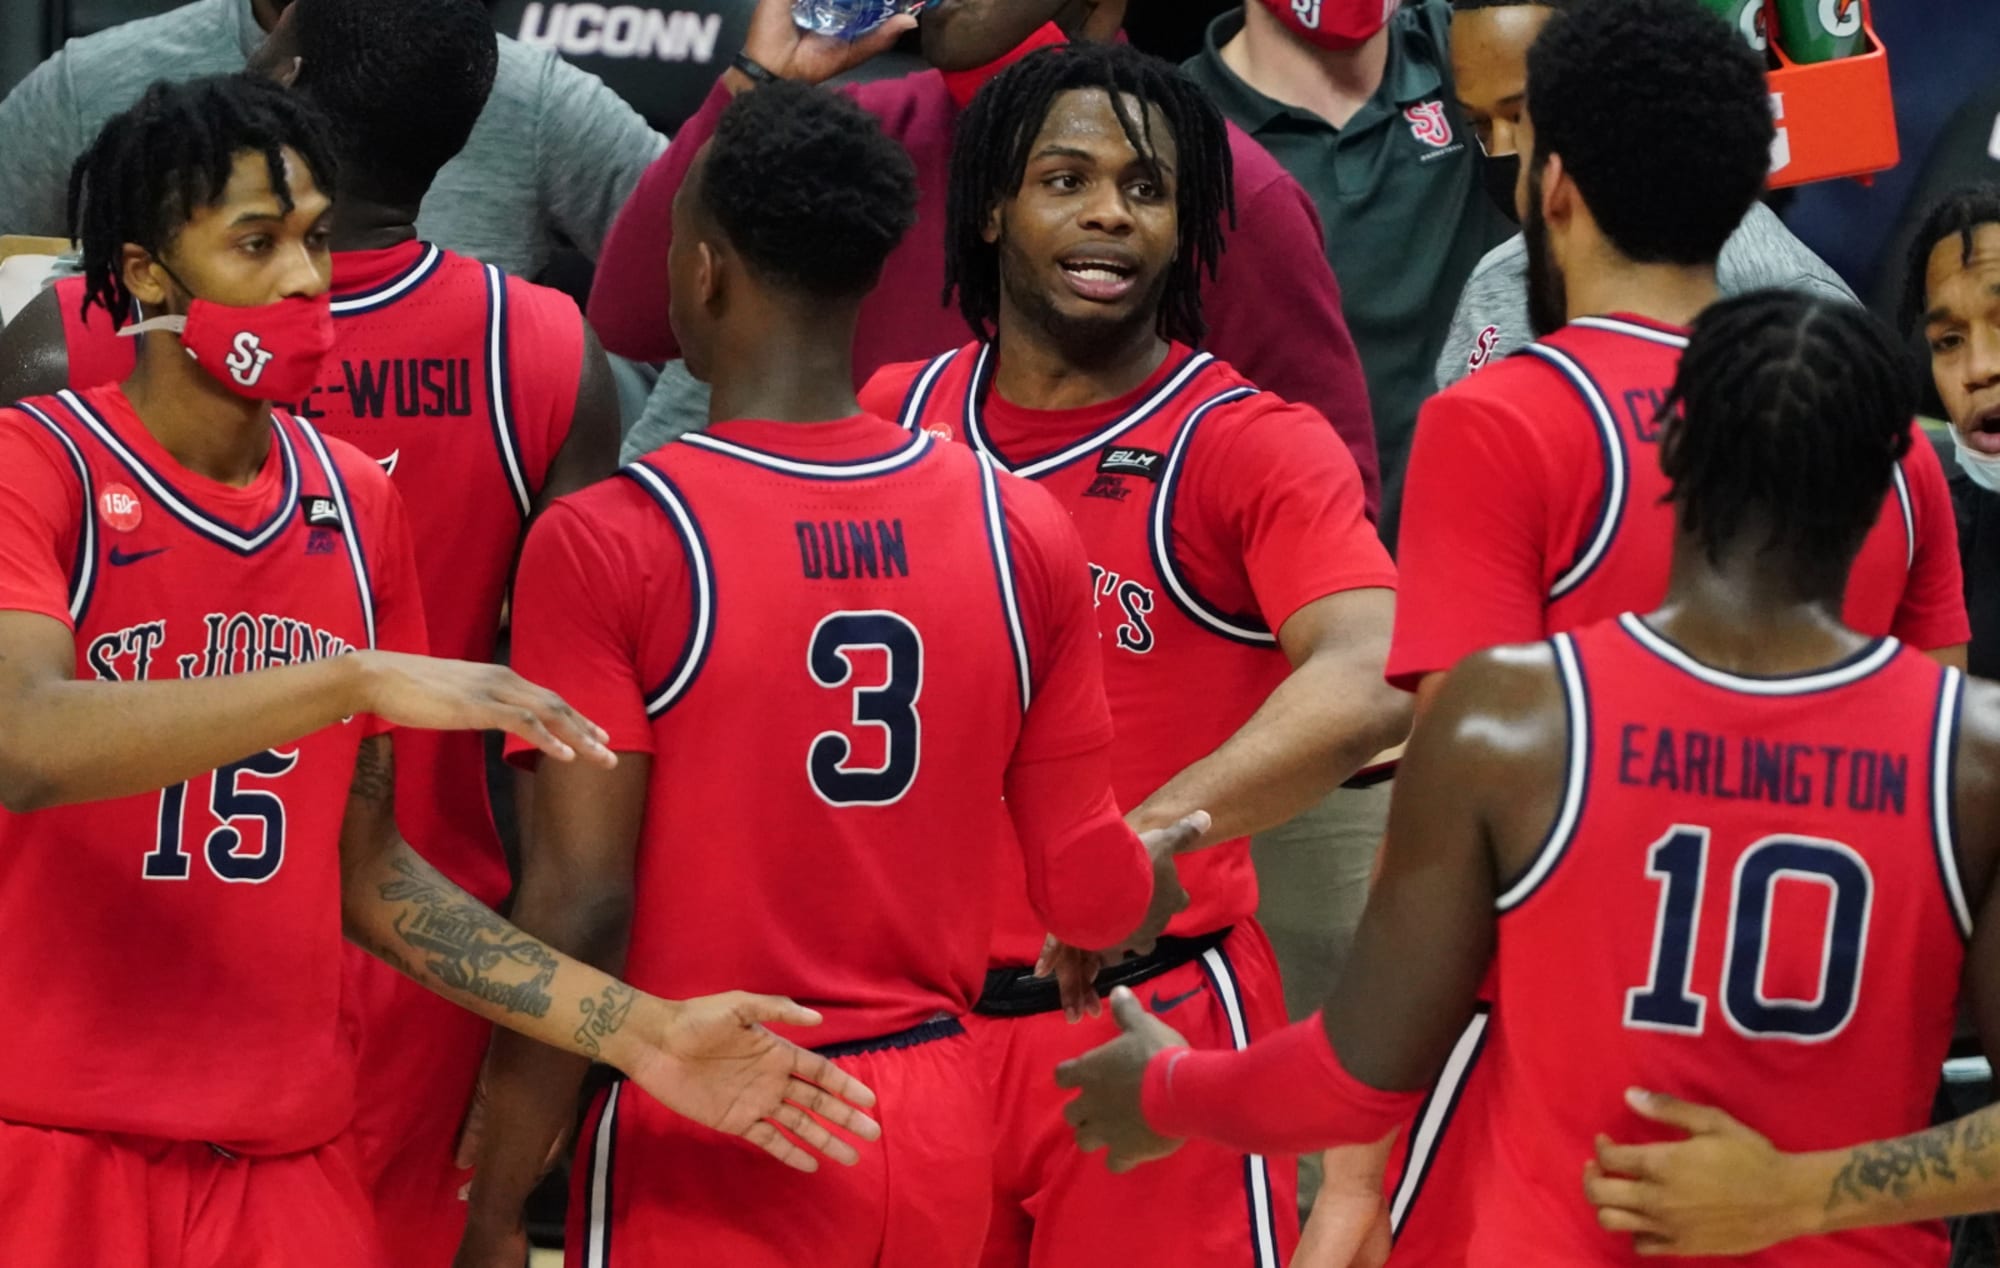 St. John's basketball can still win without production from best player